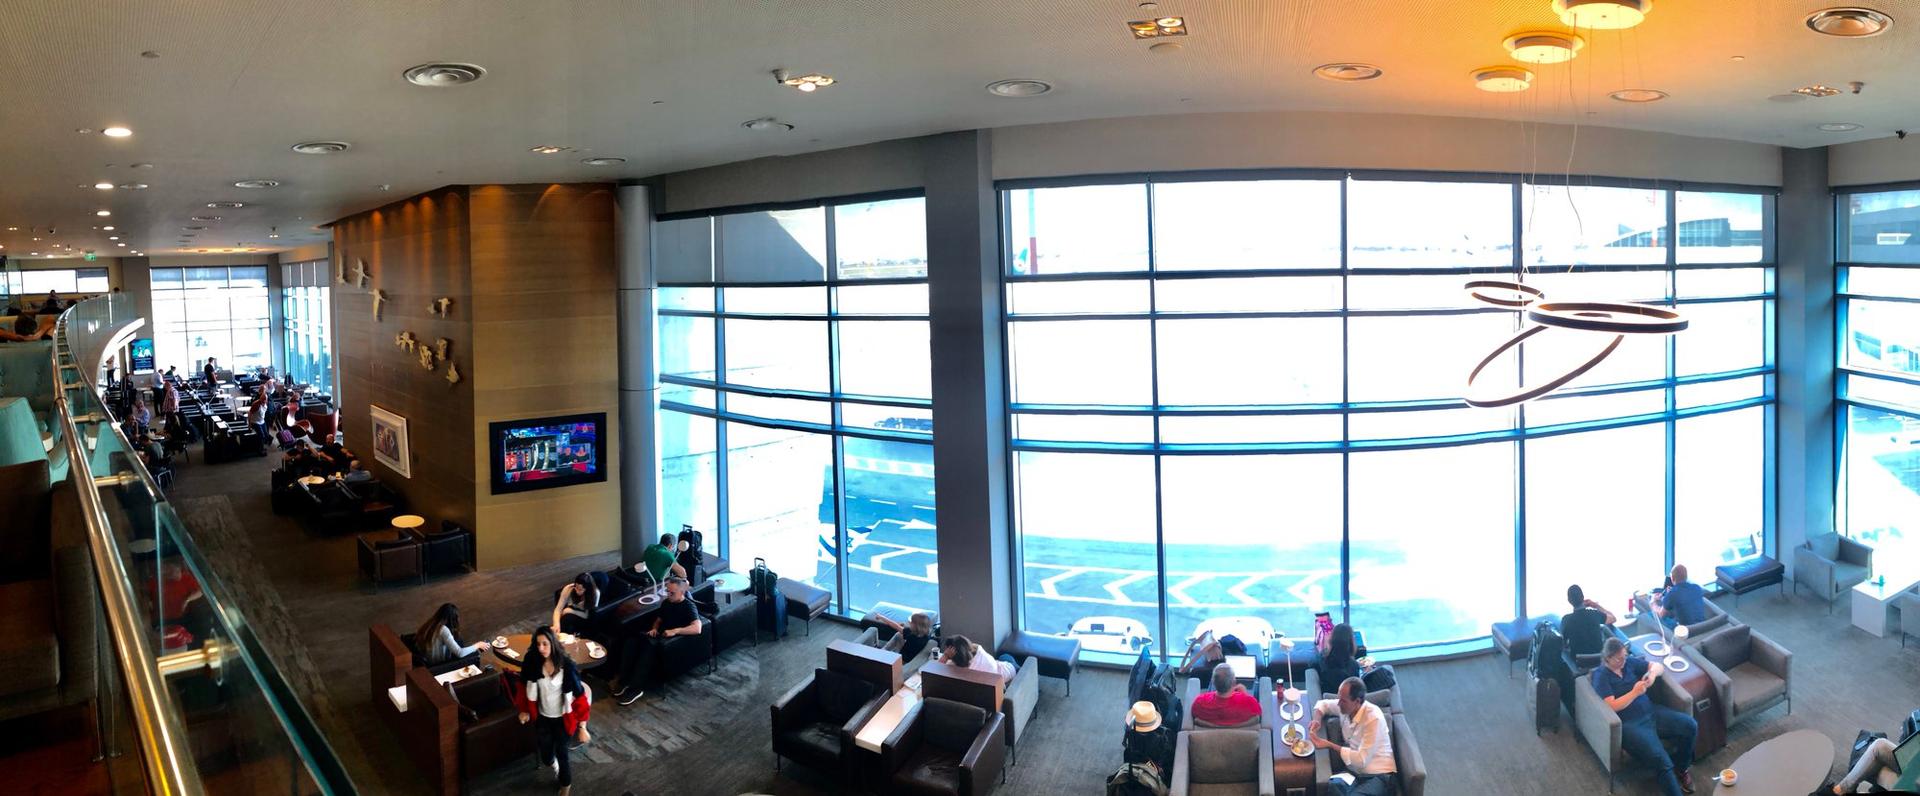 The King David Business Class Lounge image 6 of 8